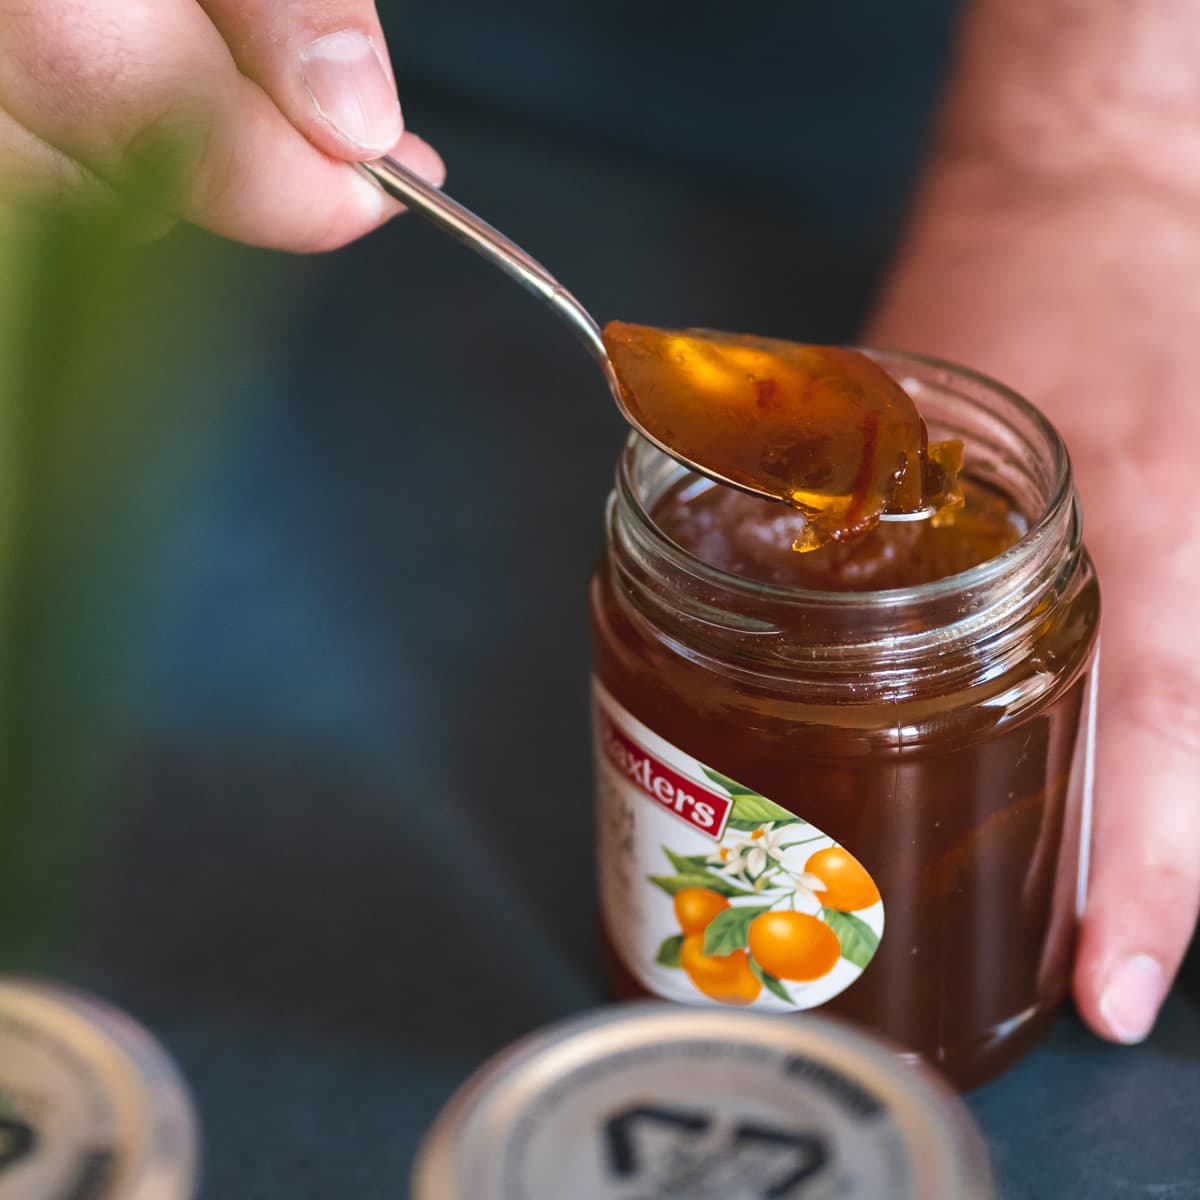 Marmalade being scooped with a spoon